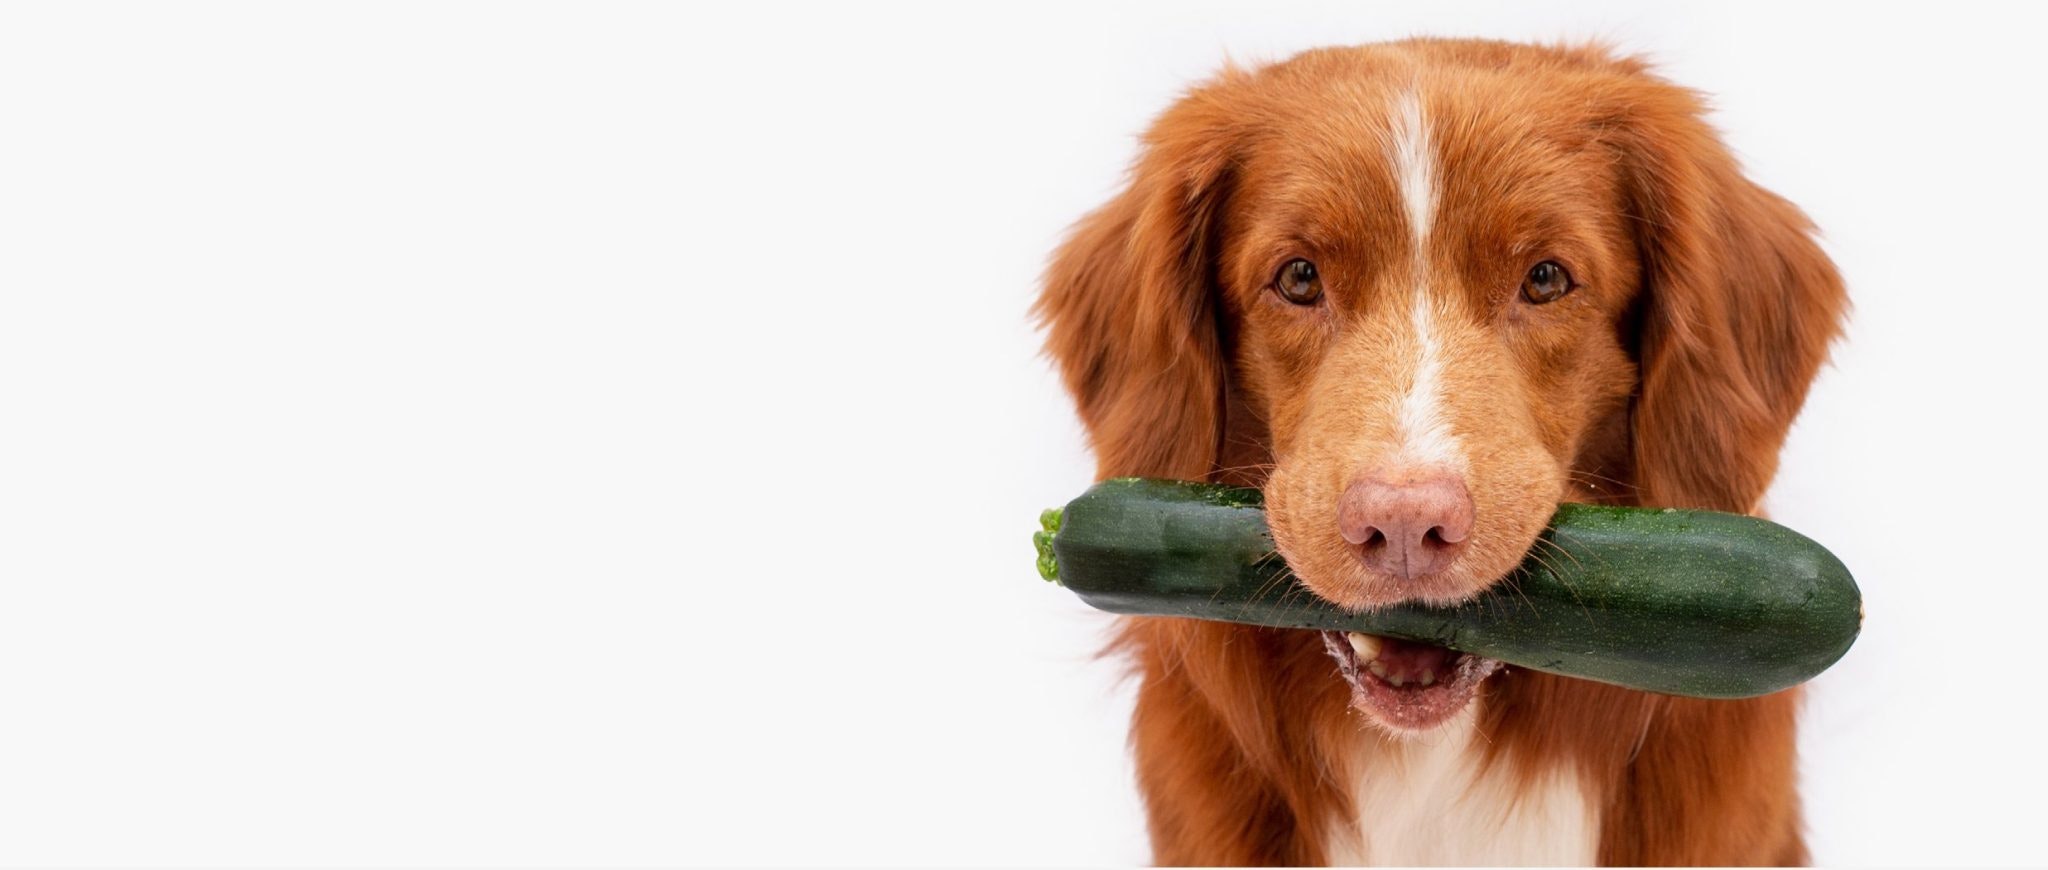 https://images.sifted.eu/wp-content/uploads/2021/11/02115336/Dog-with-courgette-scaled.jpeg?w=2048&h=870&q=75&fit=crop&auto=compress,format